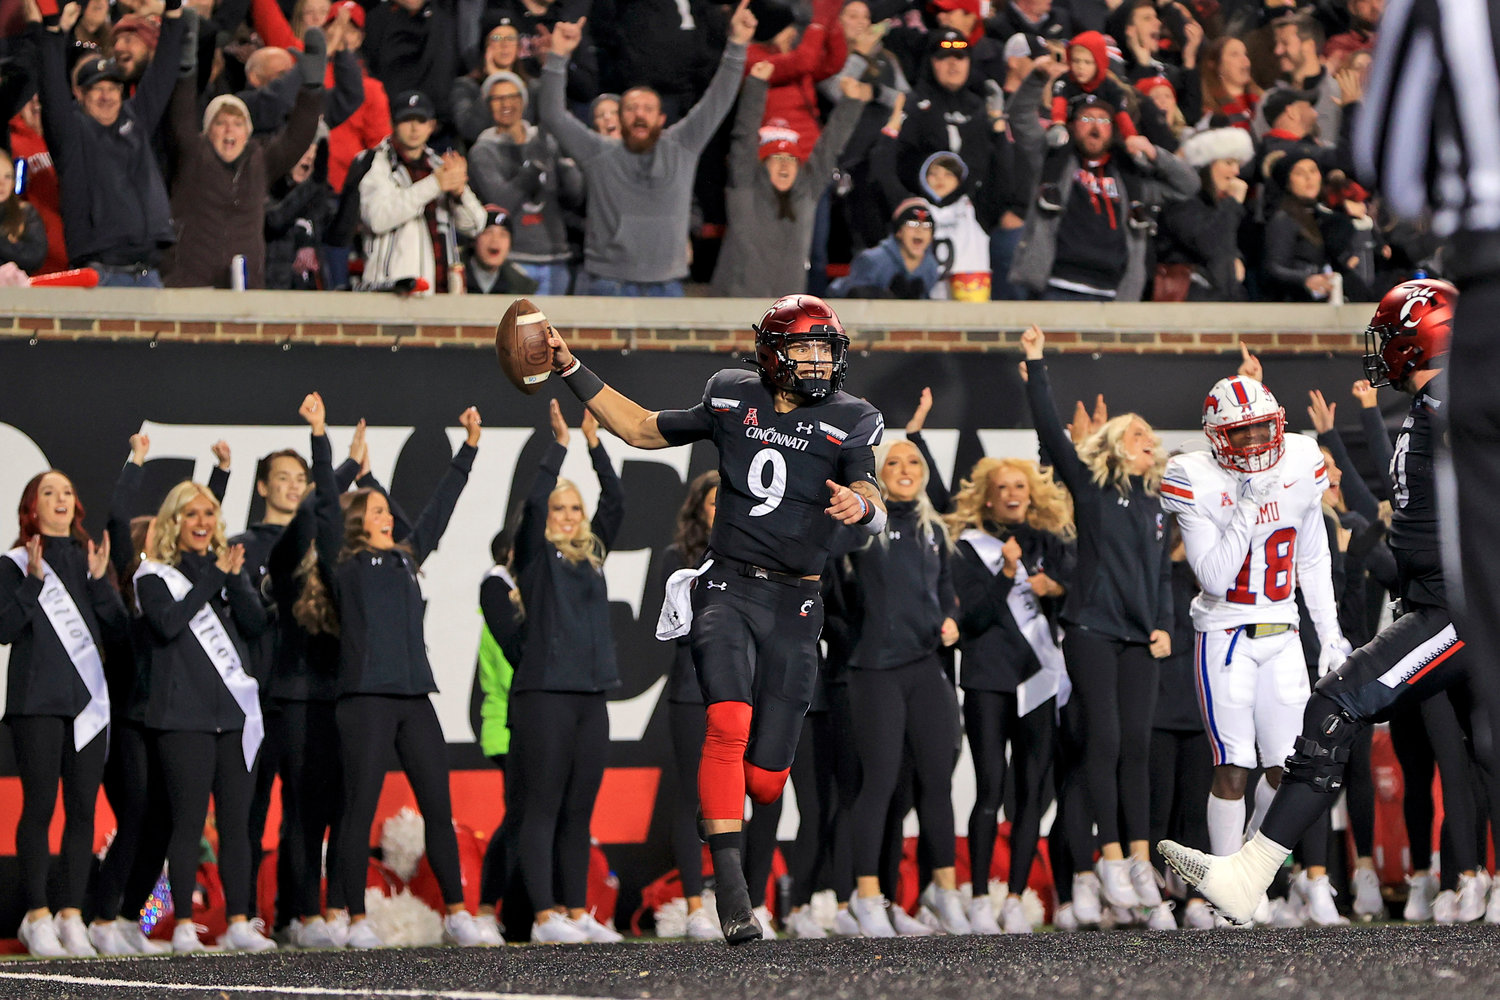 INTO CFP TOP 4 — Cincinnati quarterback Desmond Ridder celebrates after catching a touchdown pass during the second half of an NCAA college football game against SMU, Saturday, Nov. 20, 2021, in Cincinnati. Cincinnati won 48-14. The Bearcats are ranked No. 4 in this week’s College Football Playoff rankings.